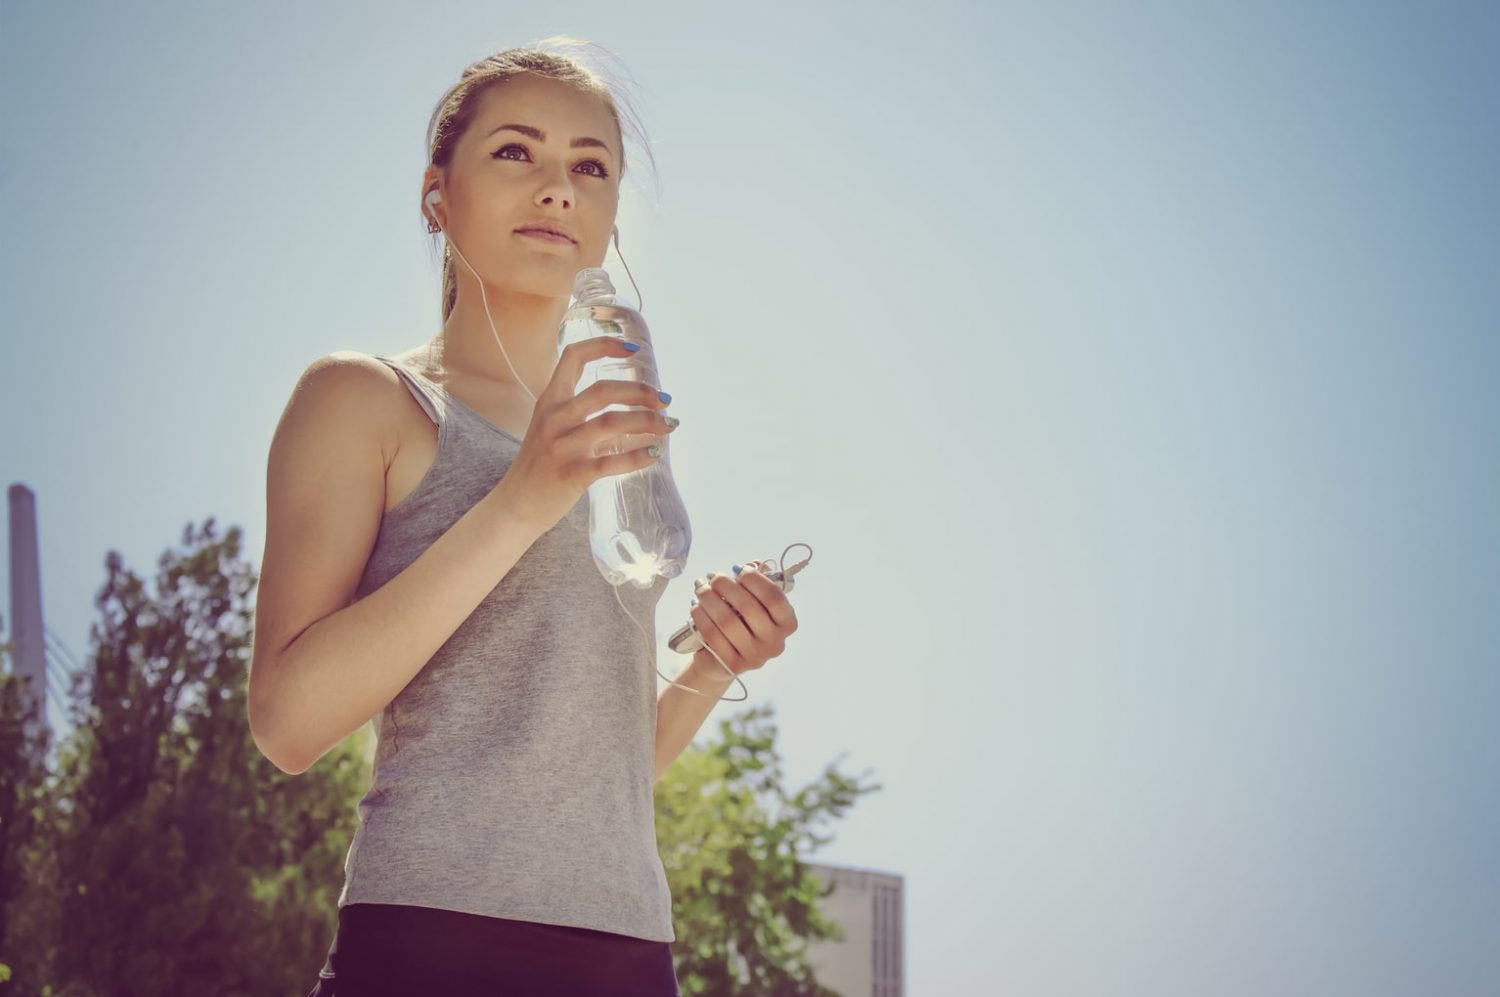 jogger performing the healthy habit of drinking water